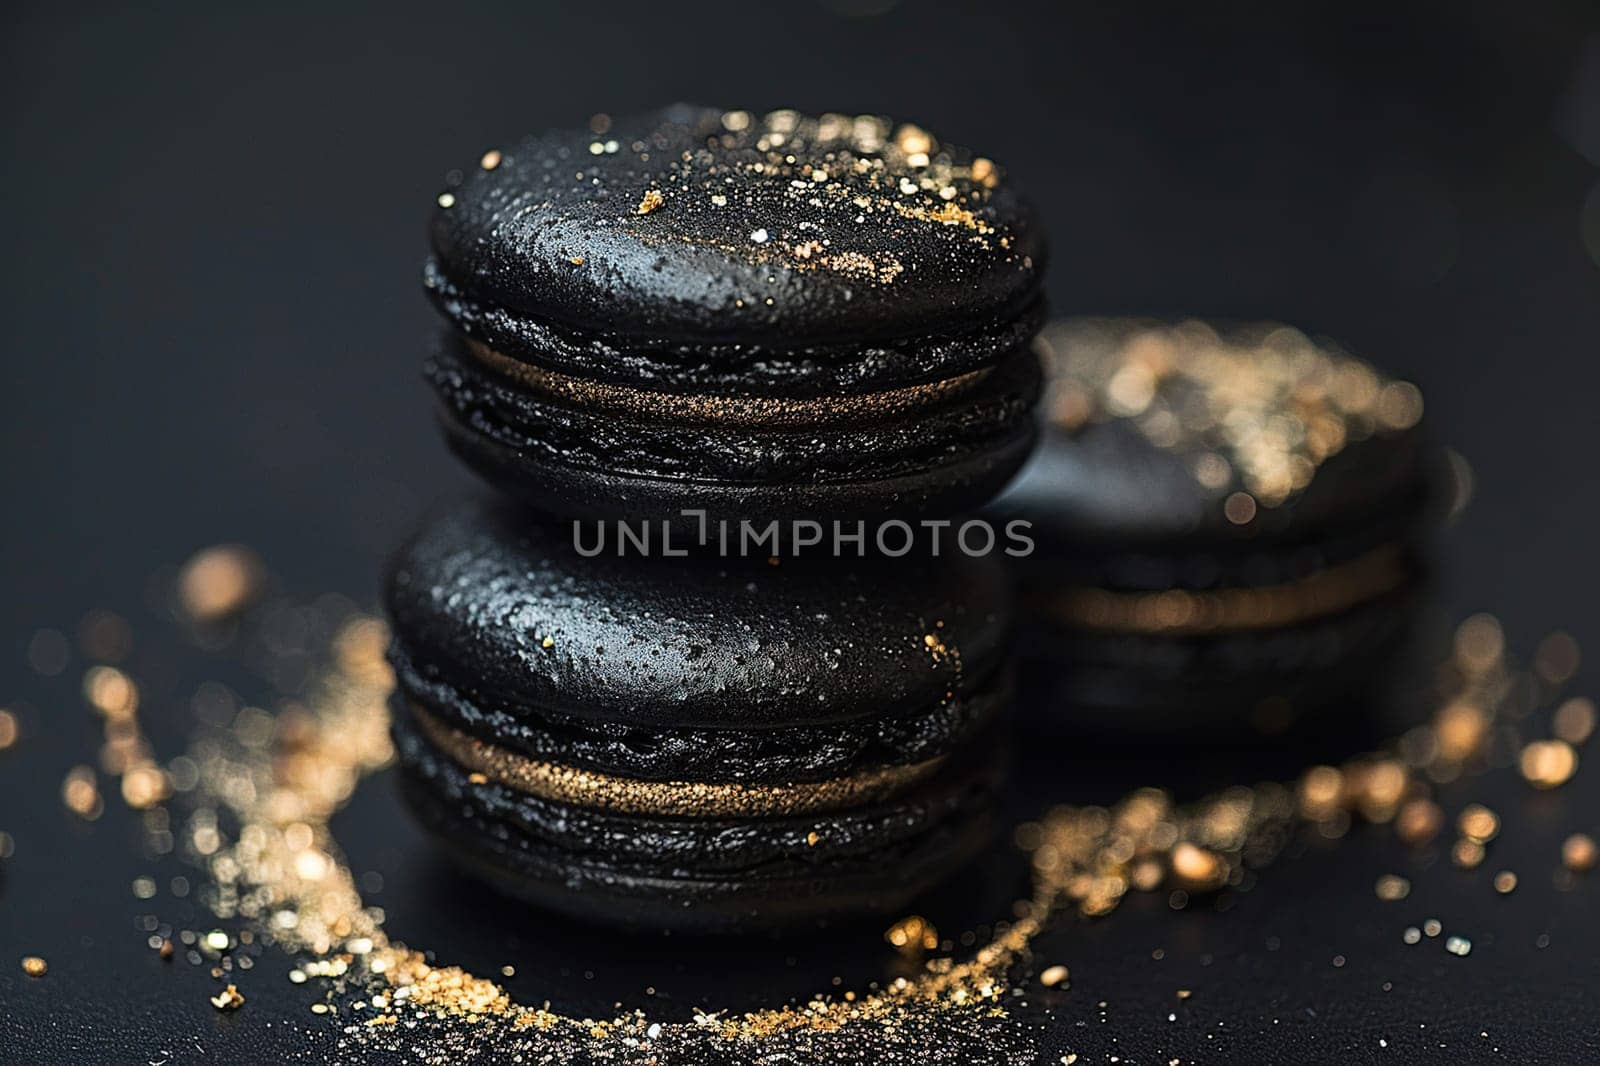 Three black macaroons with golden macaroon filling, macaroon background.